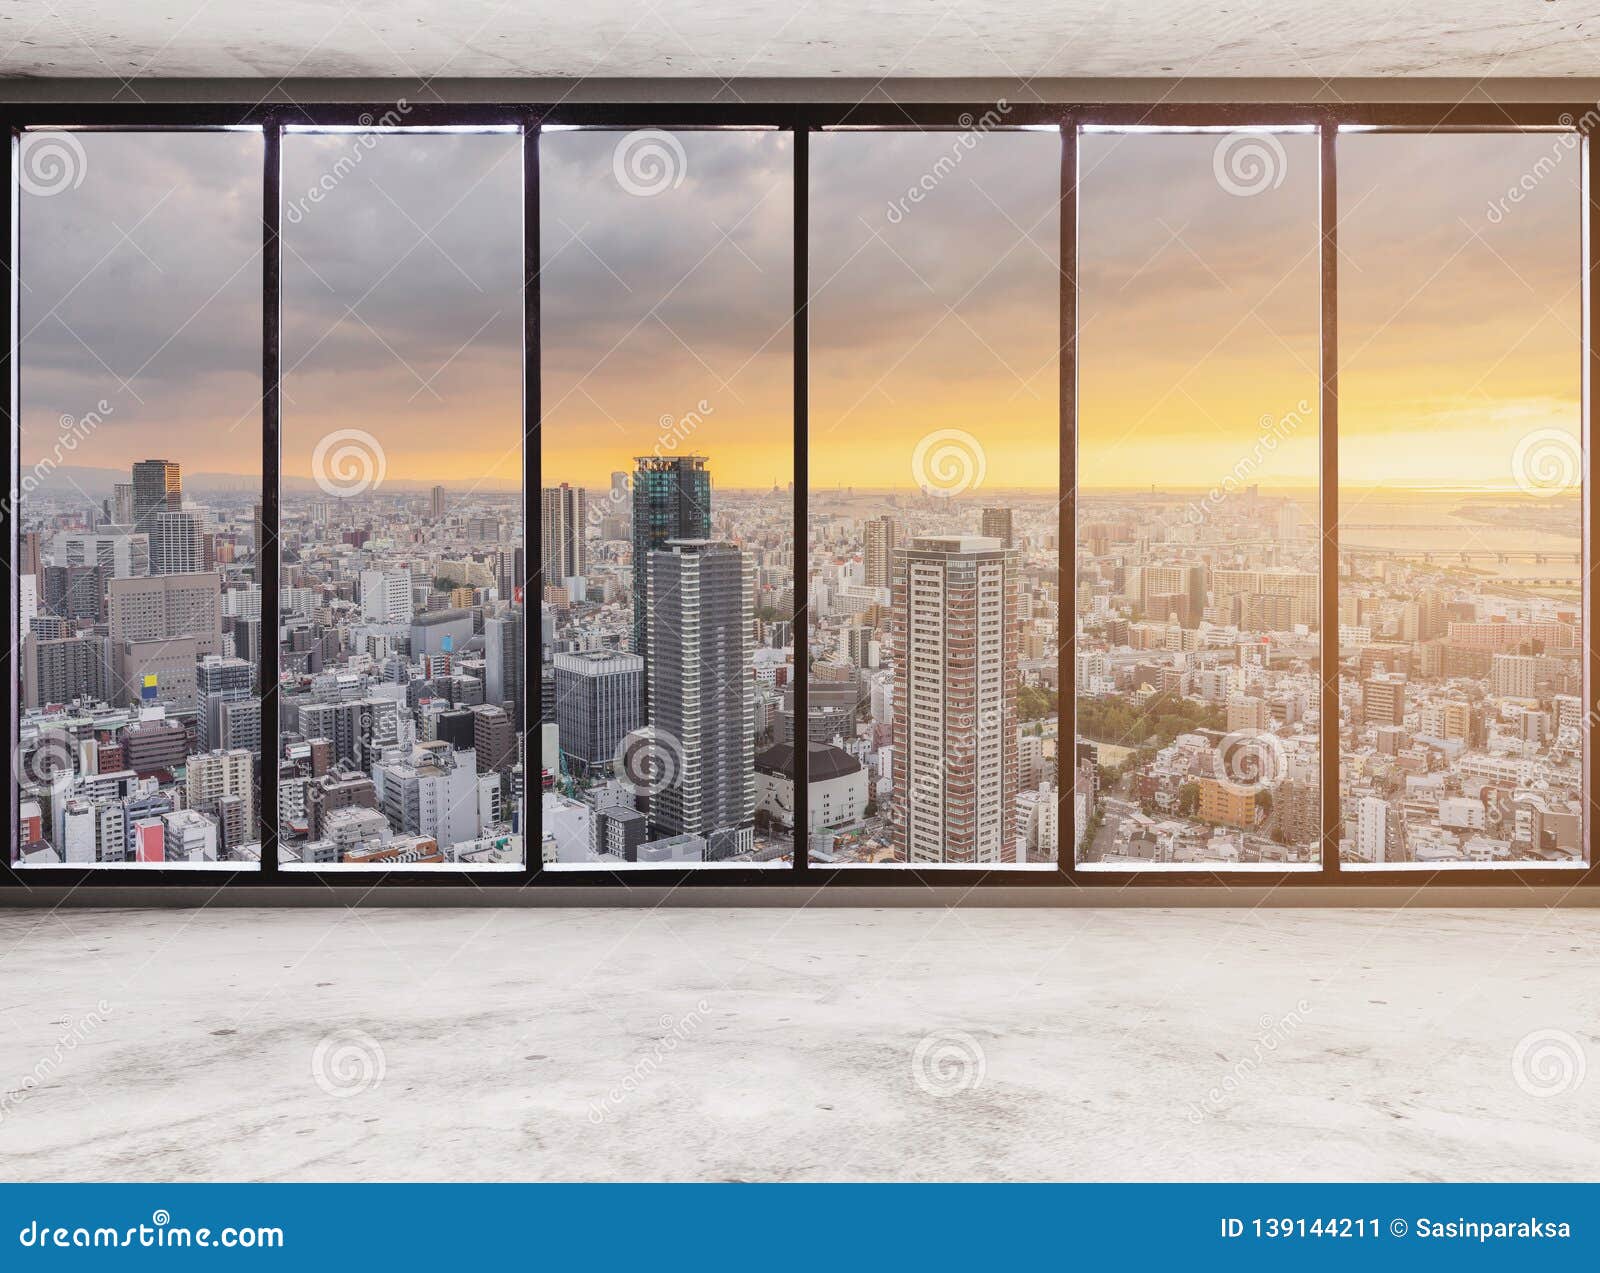 empty modern interior space with skyscraper city view in sunset, empty business office interior